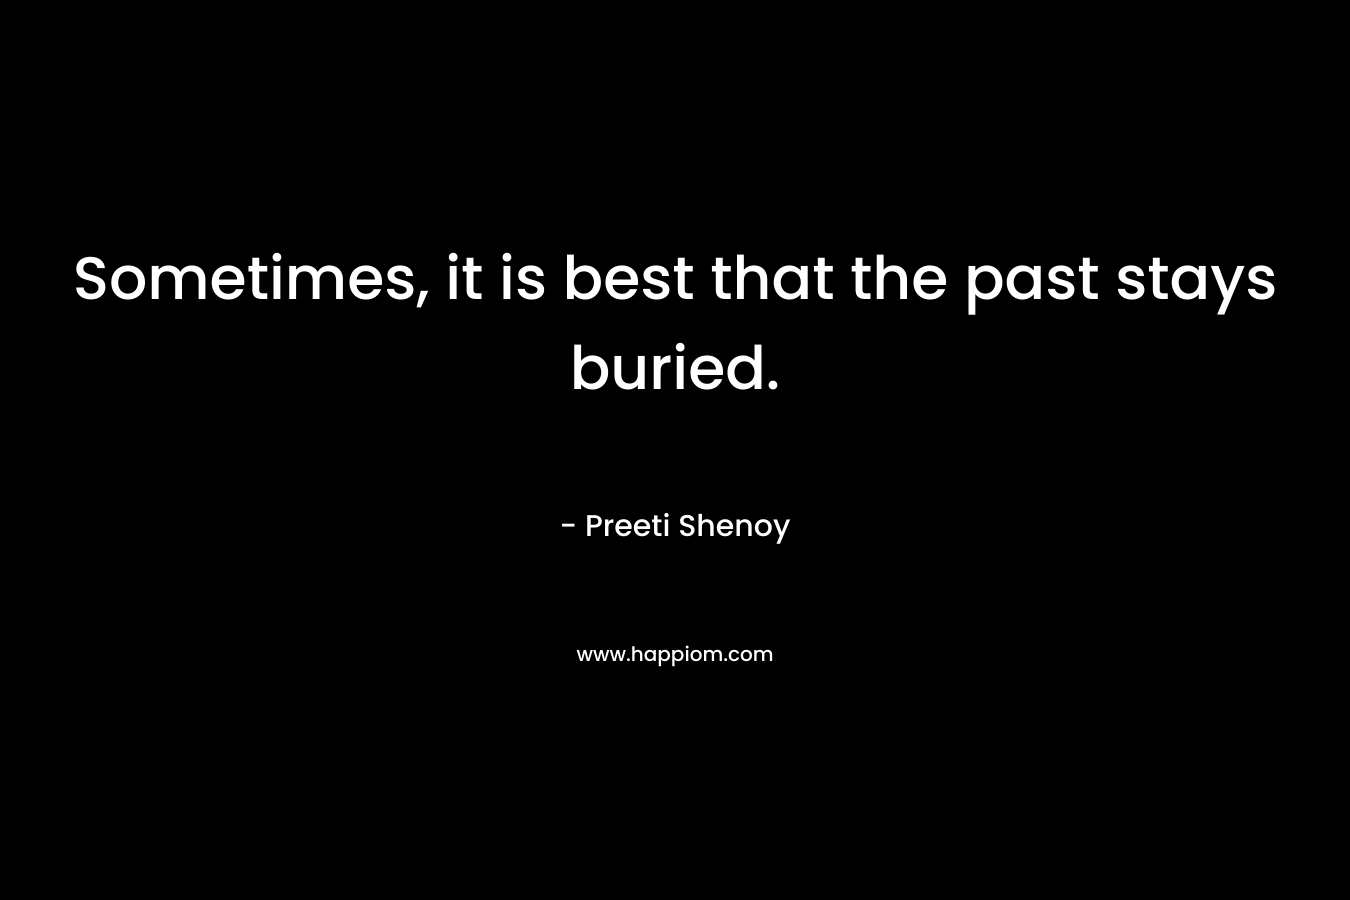 Sometimes, it is best that the past stays buried. – Preeti Shenoy